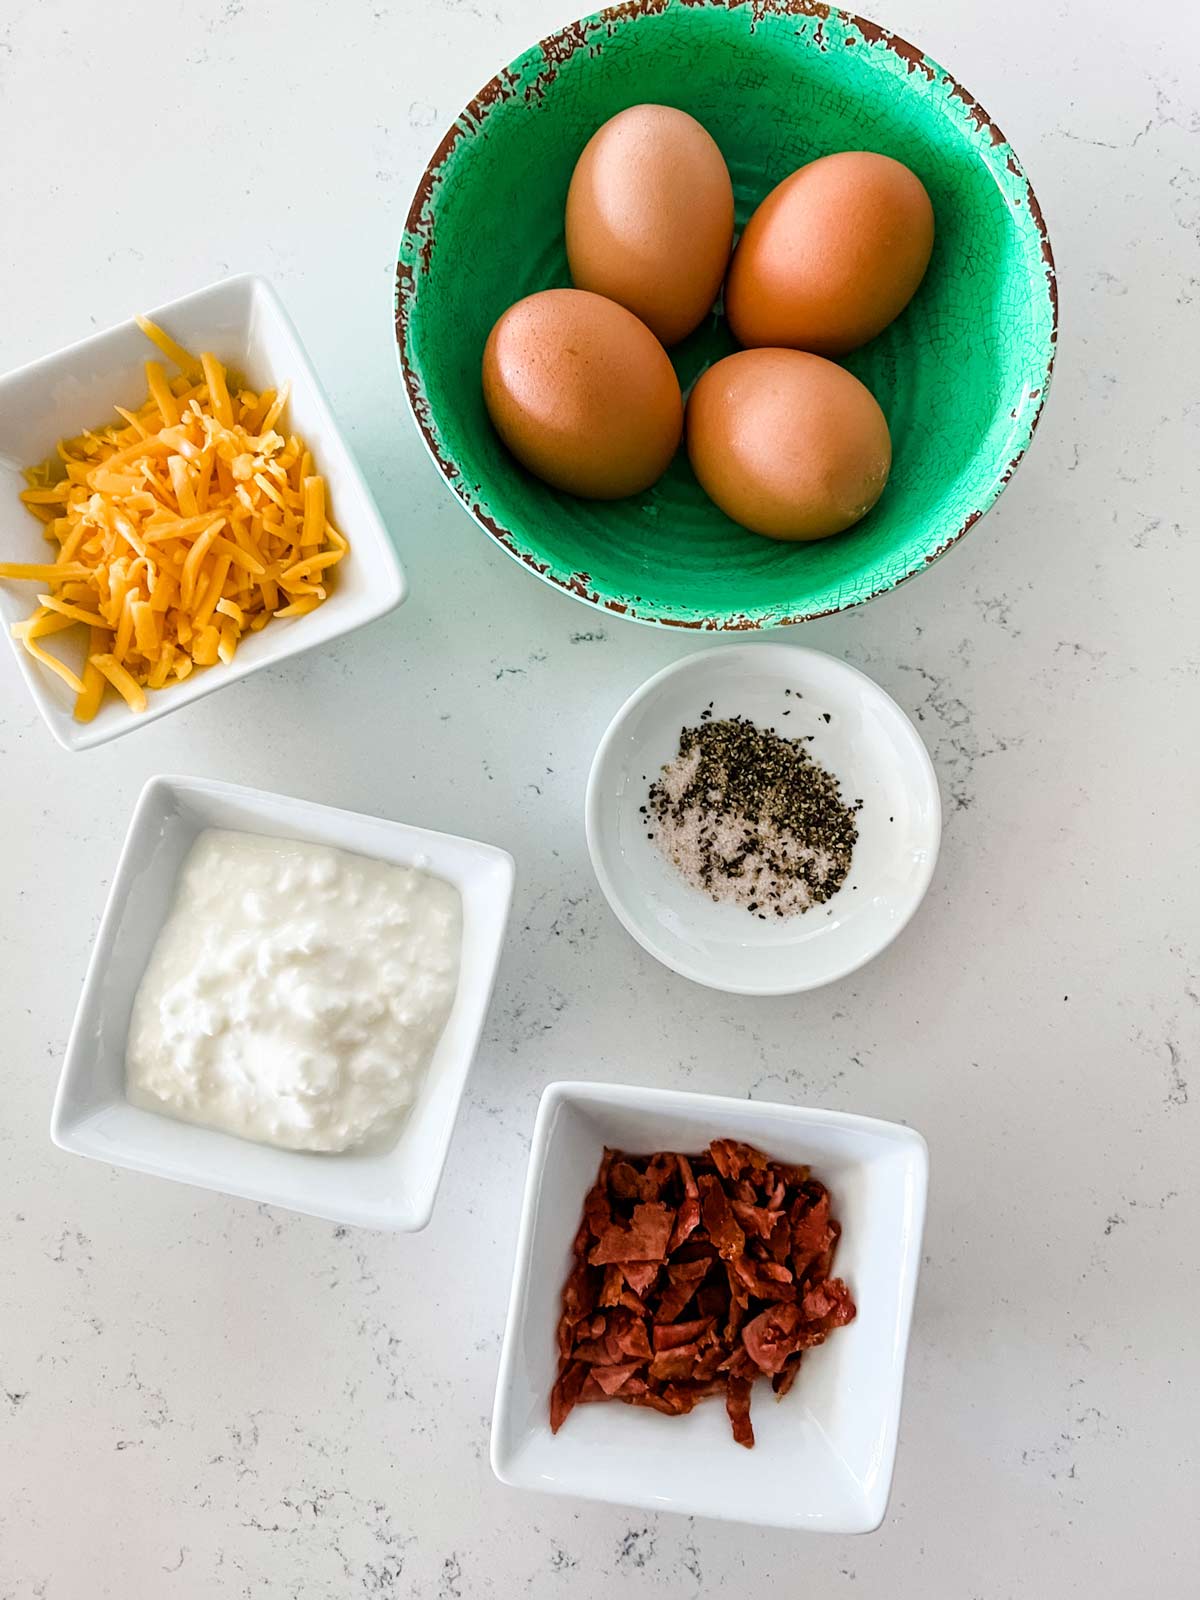 Ingredient photo of eggs, cheese, cottage cheese, bacon, and seasonings.